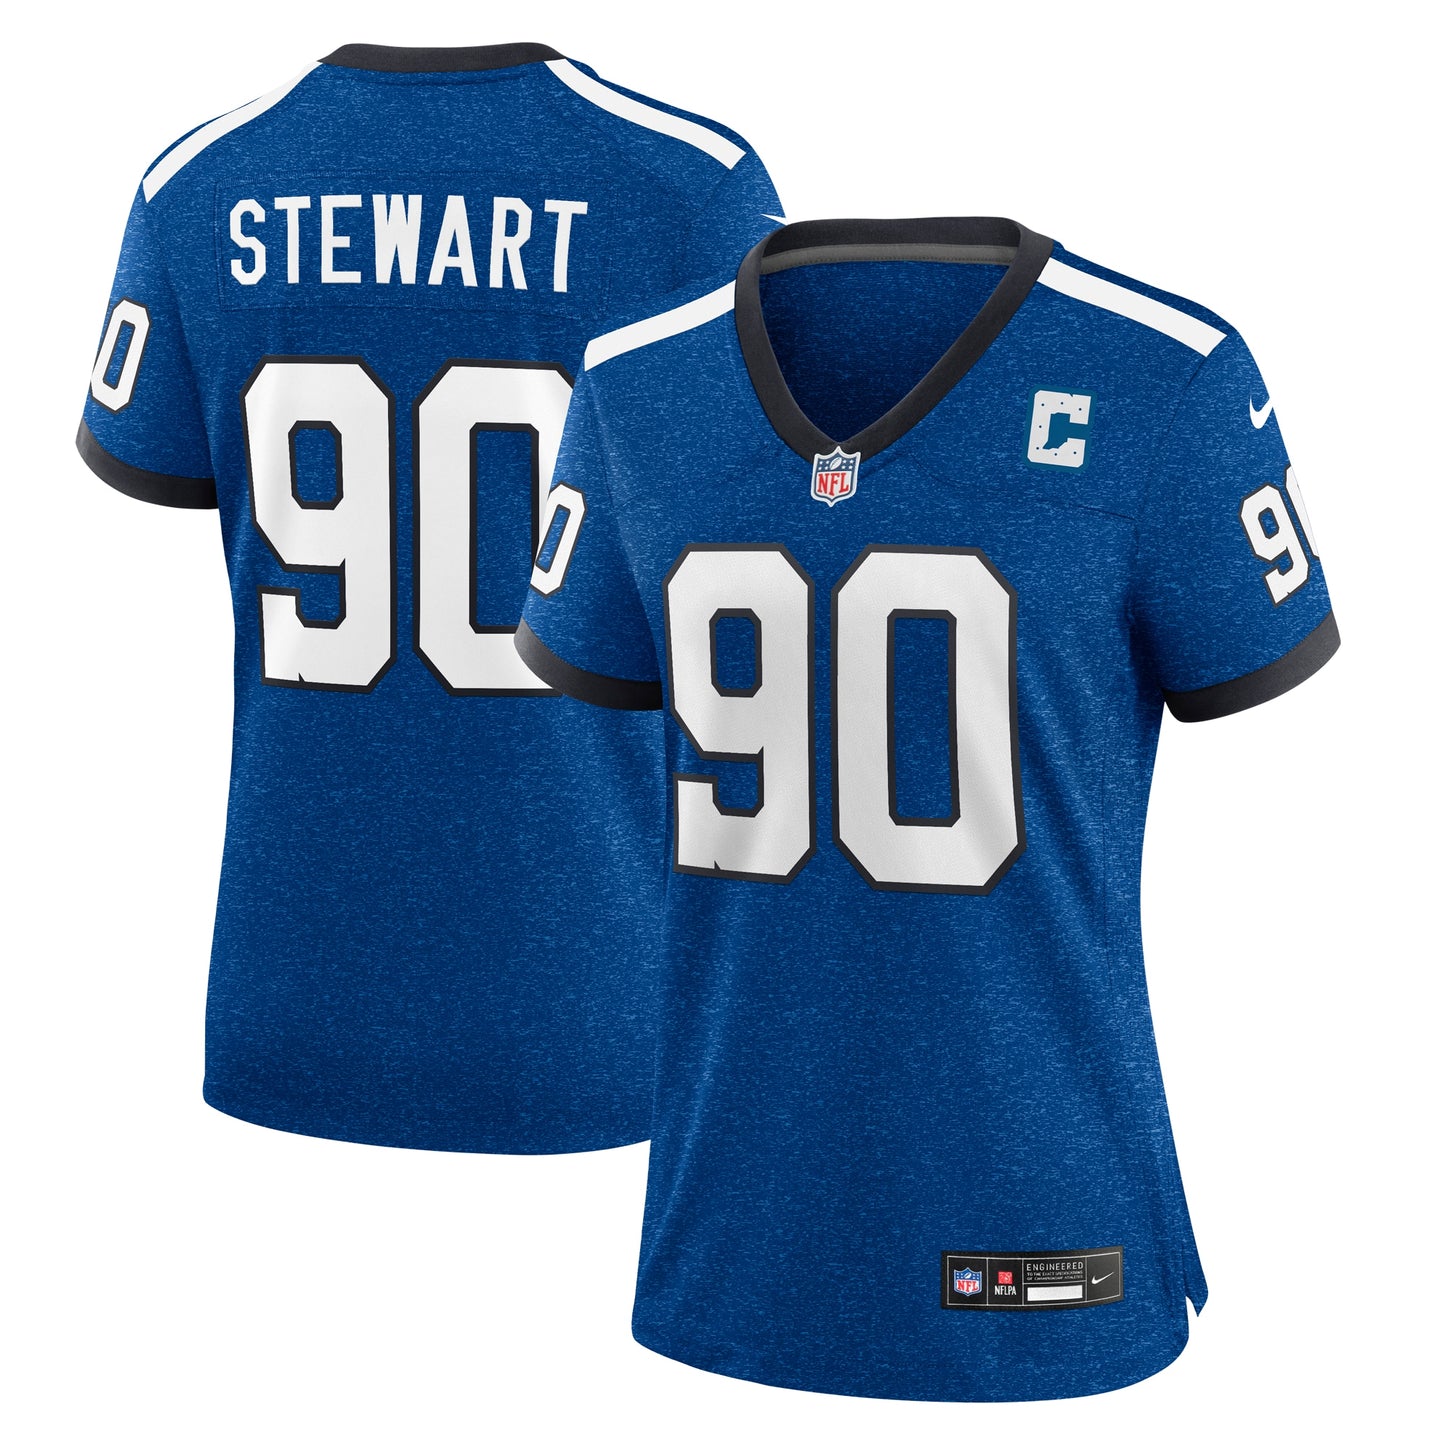 Grover Stewart Indianapolis Colts Nike Women's Indiana Nights Alternate Game Jersey - Royal